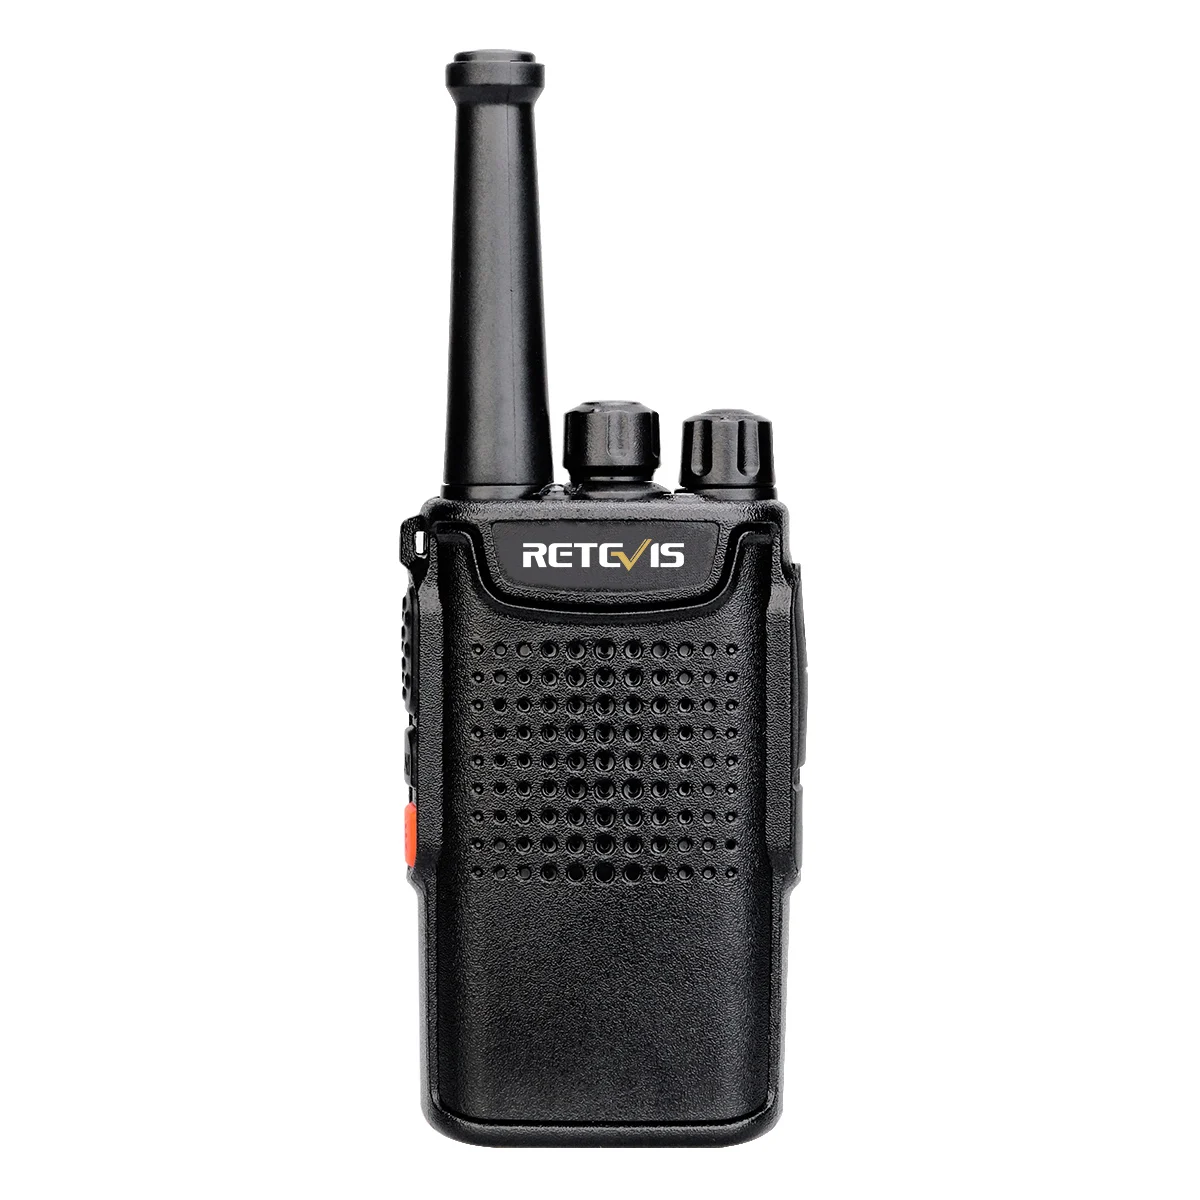 

3000mAh High capacity walkie talkie Retevis RT667 0.5W PMR446 license free 16Channels CTCSS/DCS TOT VOX Scan Two Way Radio, Black/black red